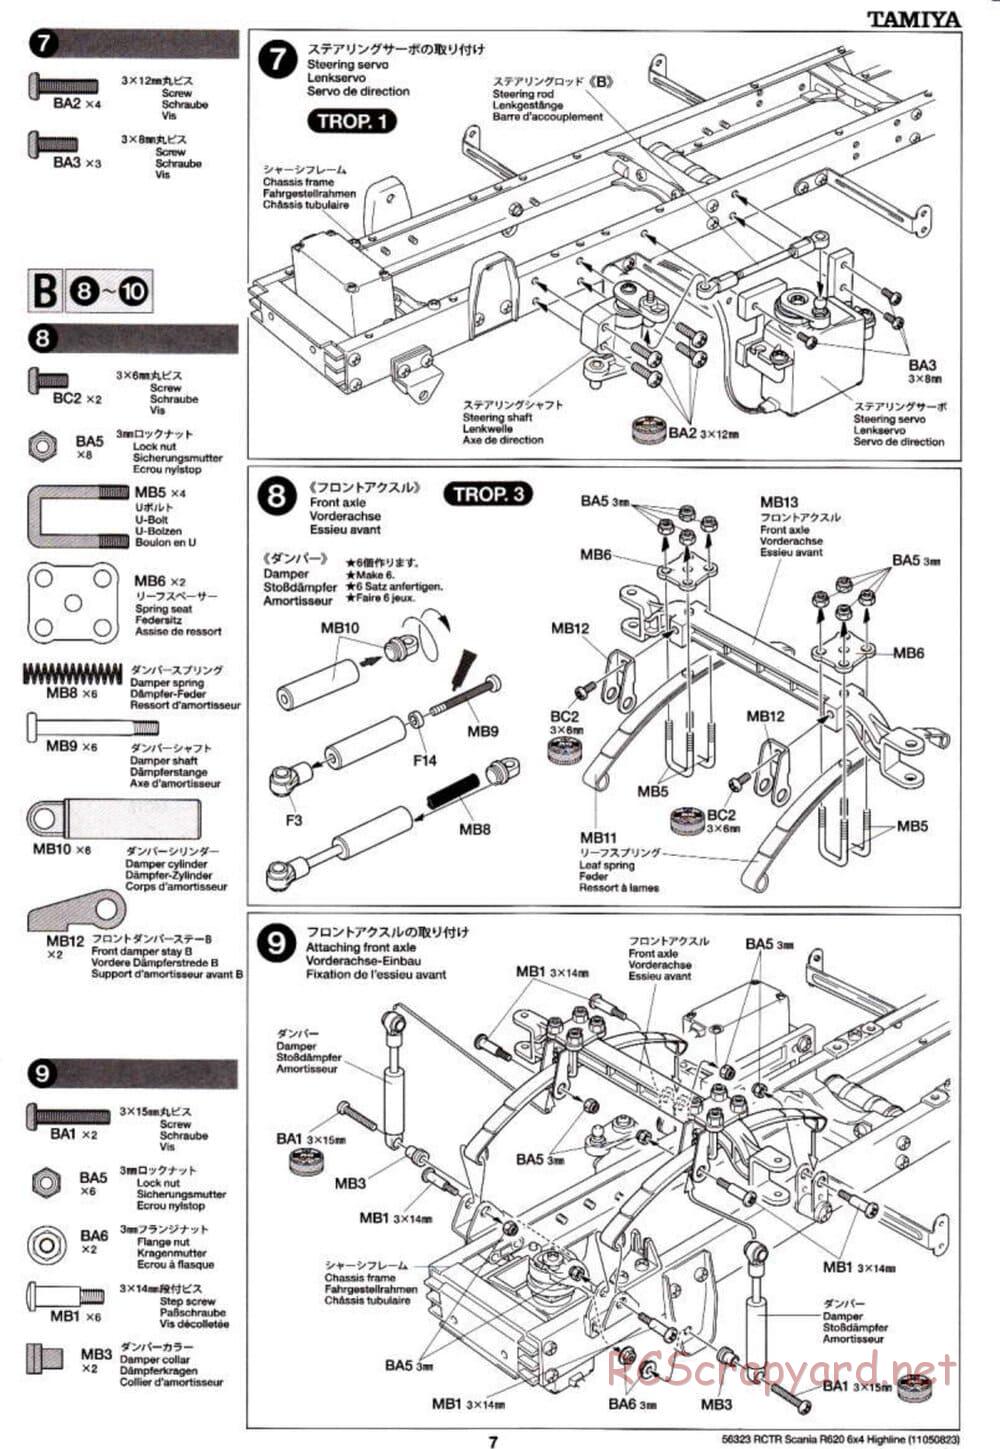 Tamiya - Scania R620 6x4 Highline Tractor Truck Chassis - Manual - Page 7